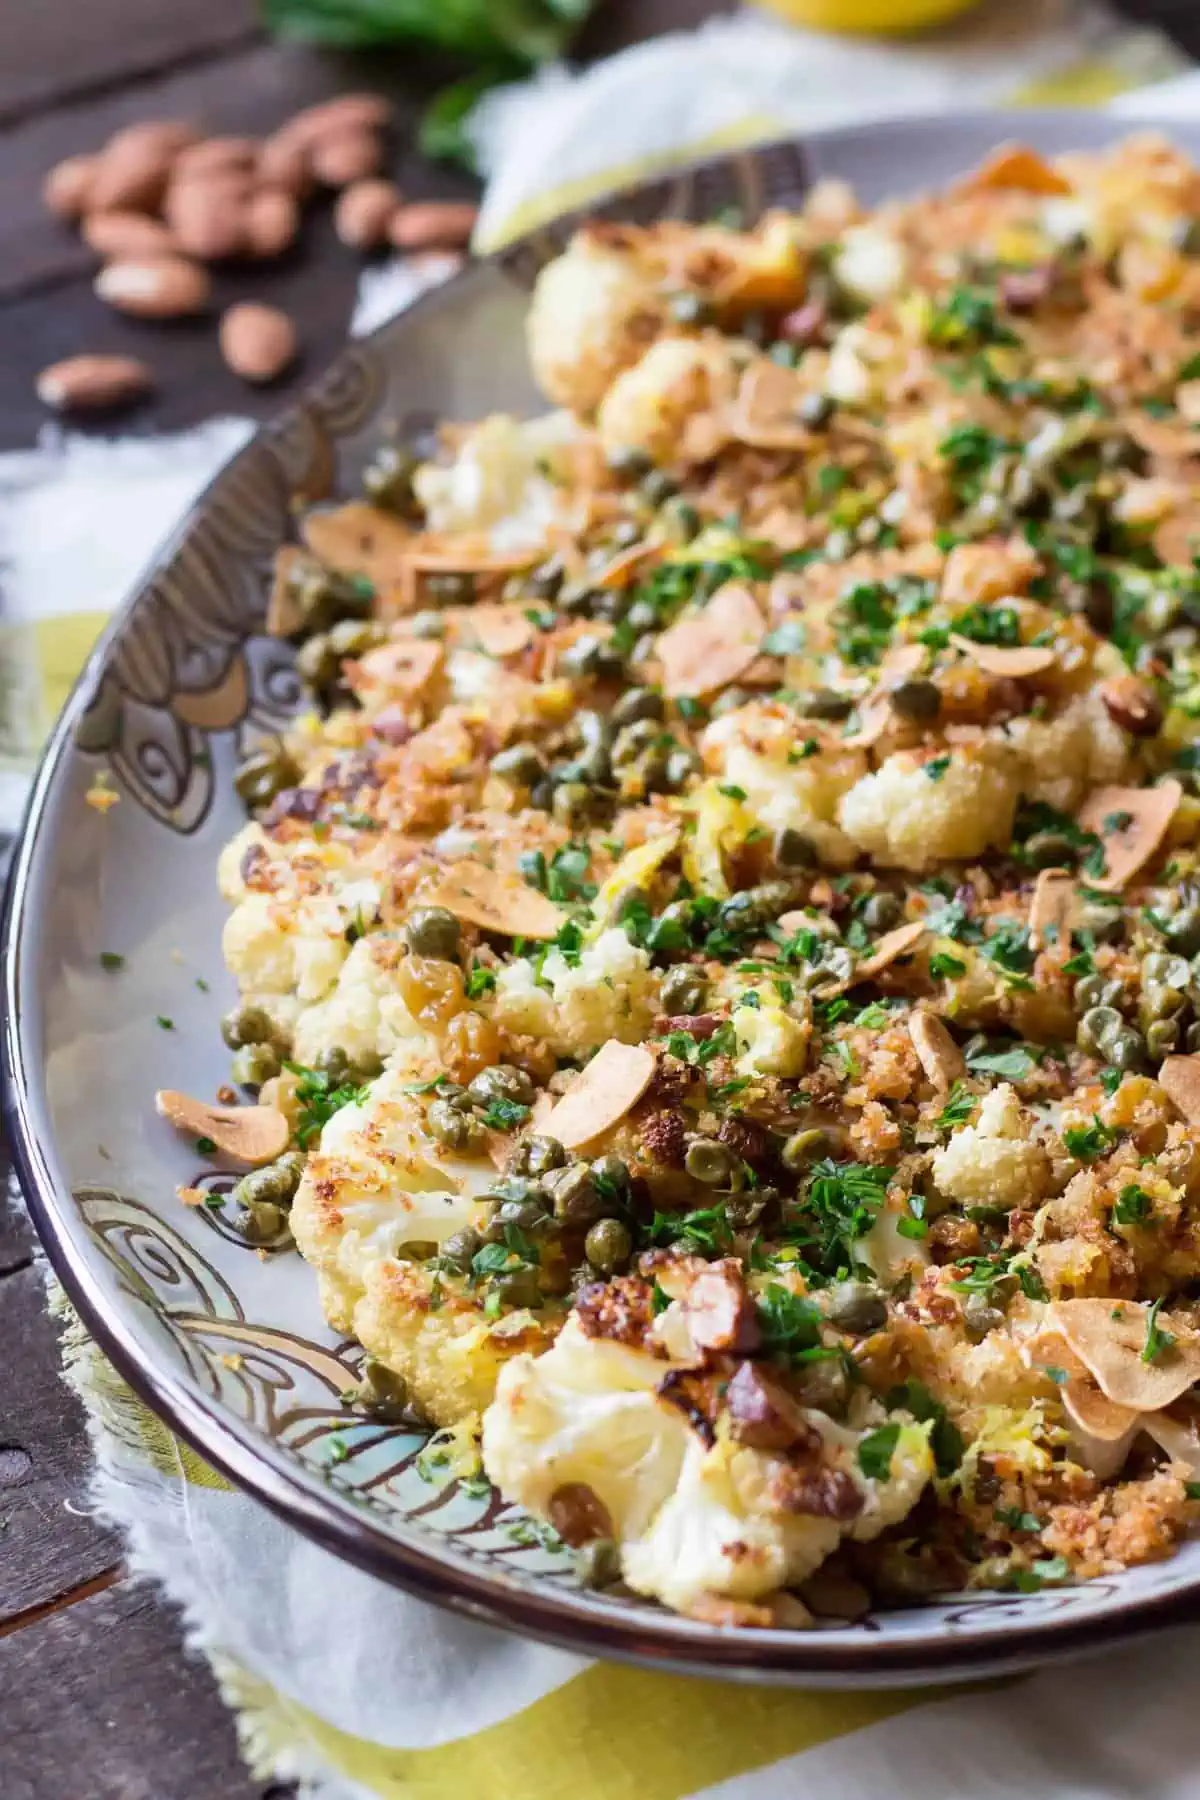 Roasted cauliflower with almonds and capers on an oval serving platter.